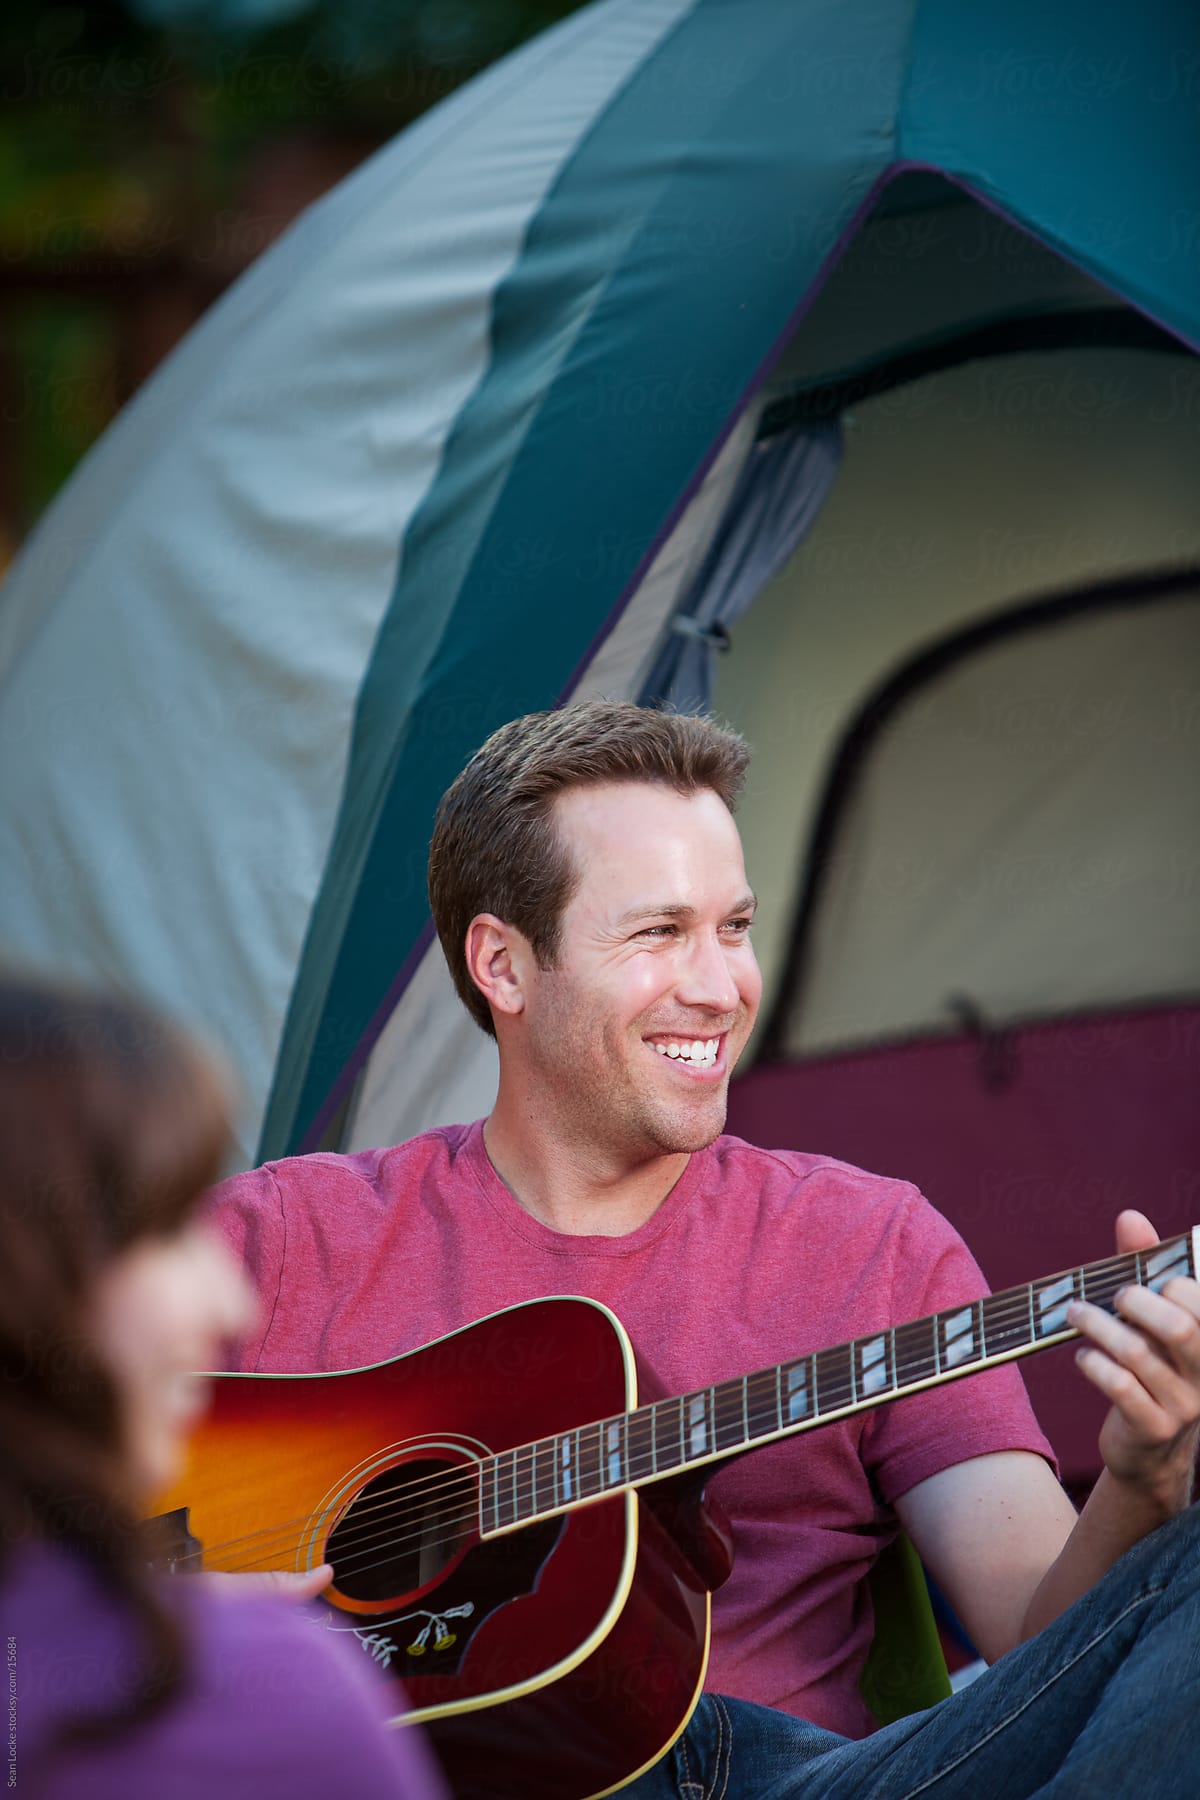 Camping: Guy Plays Guitar By Tent